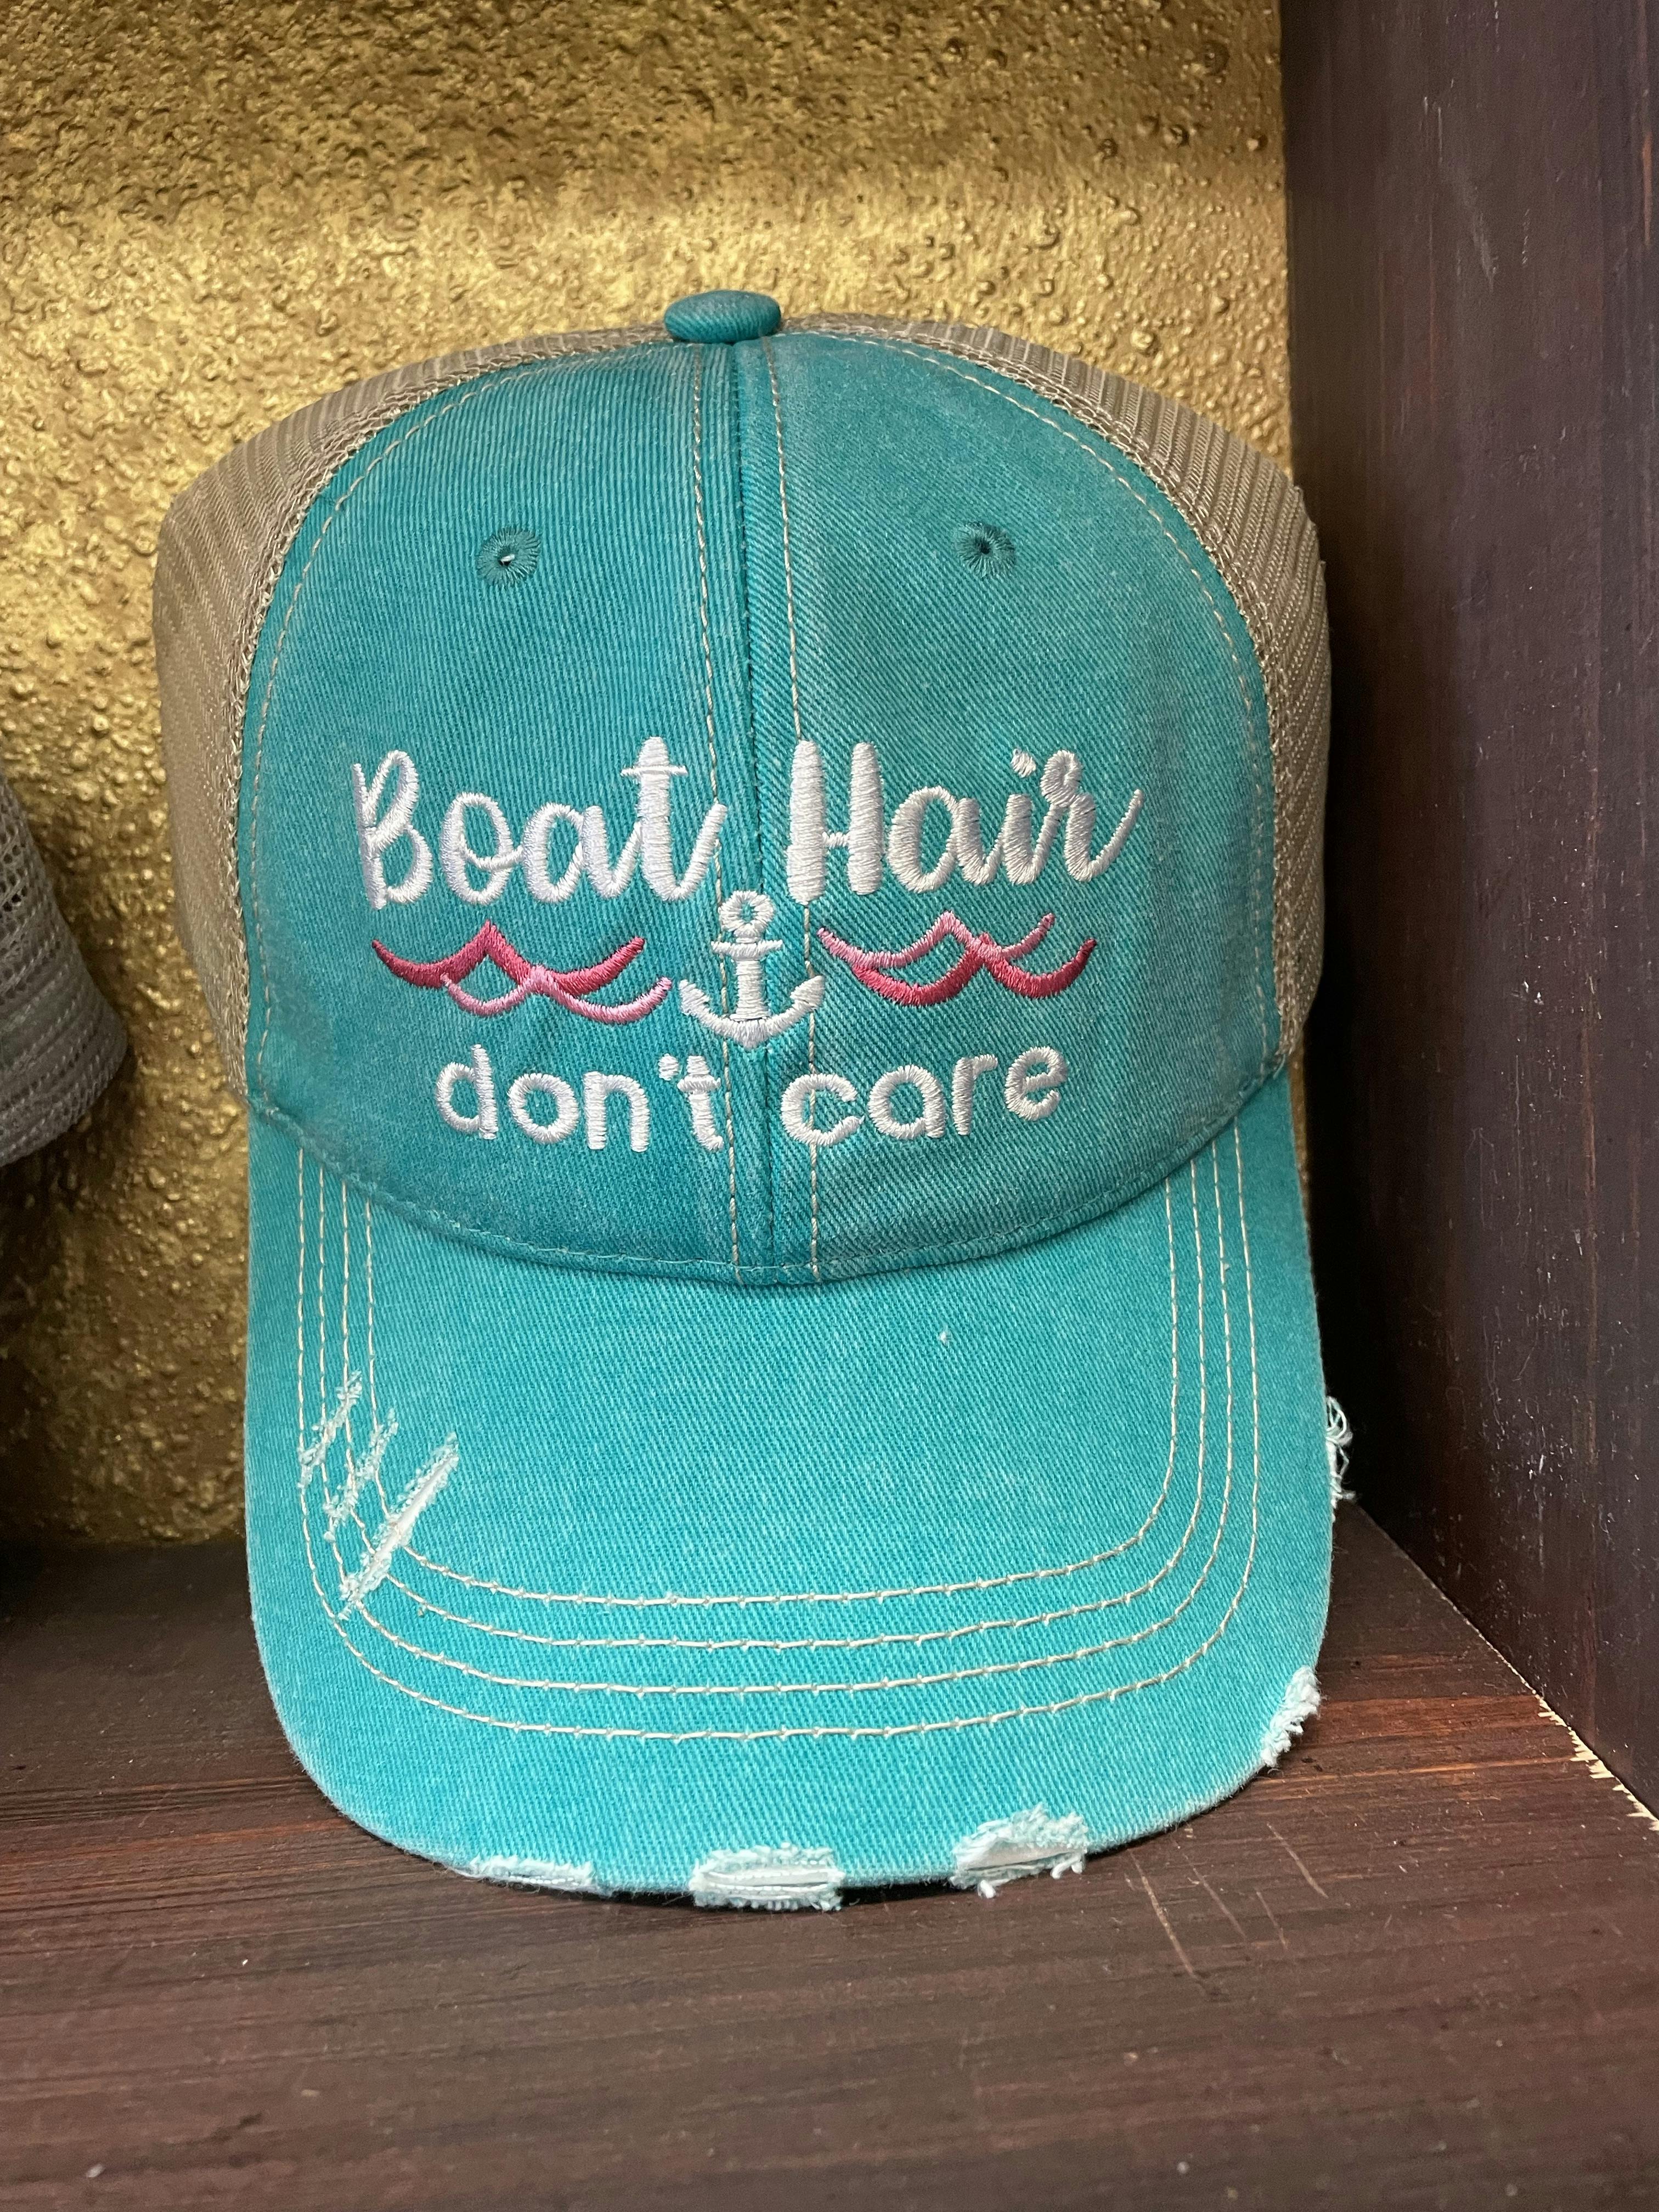 Distressed “boat hair” hat in teal 